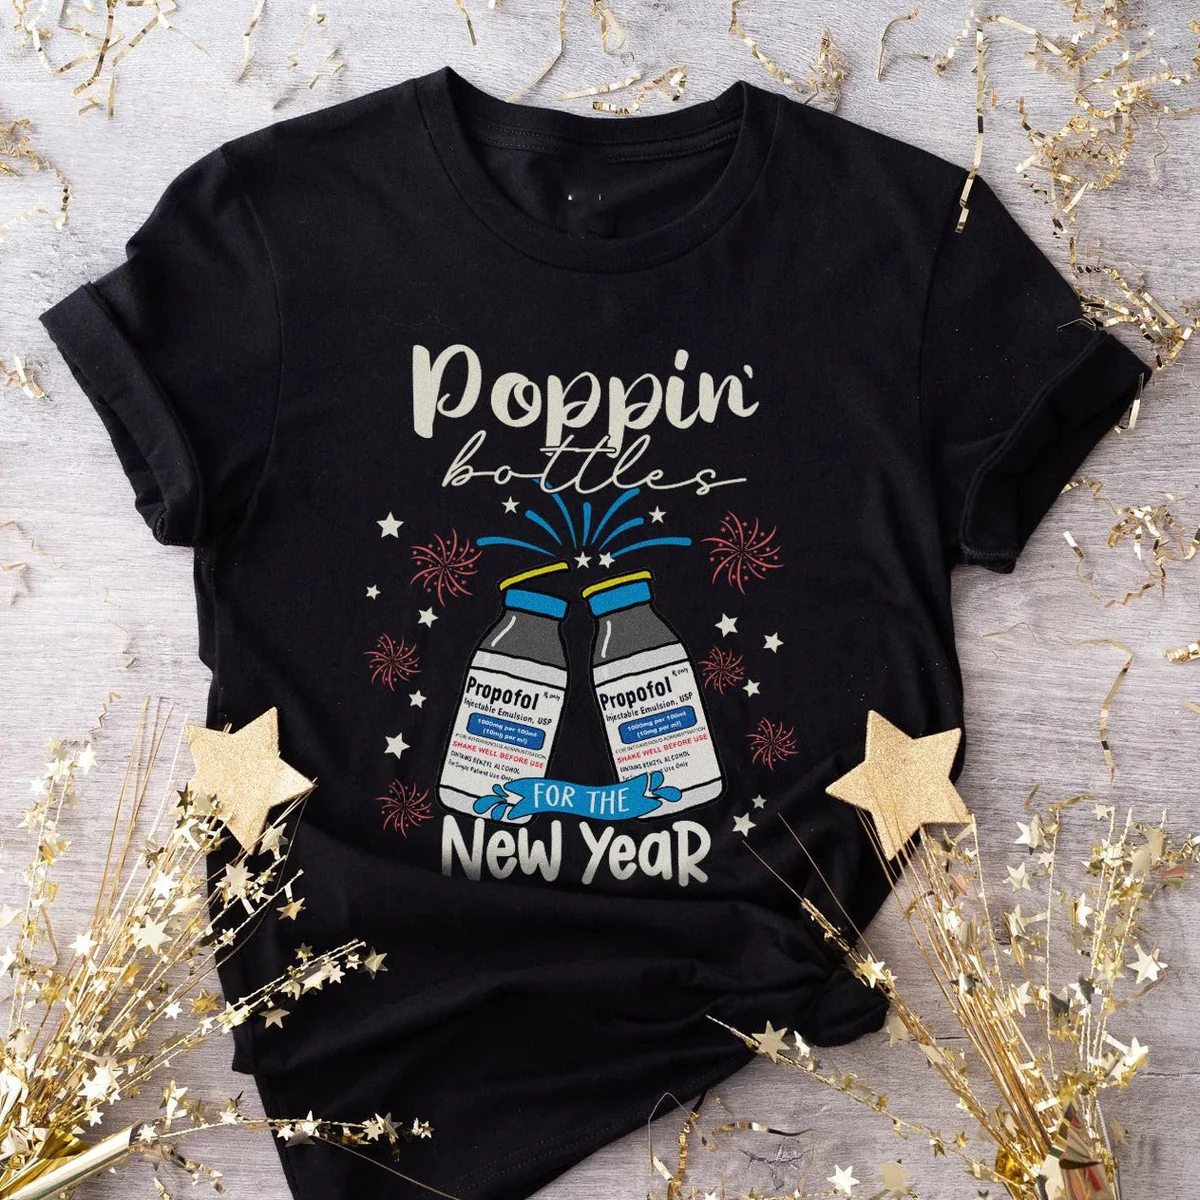 Celebrate in chic style with our Poppin Bottle New Year T-shirt in classic black. Cheers to fashion